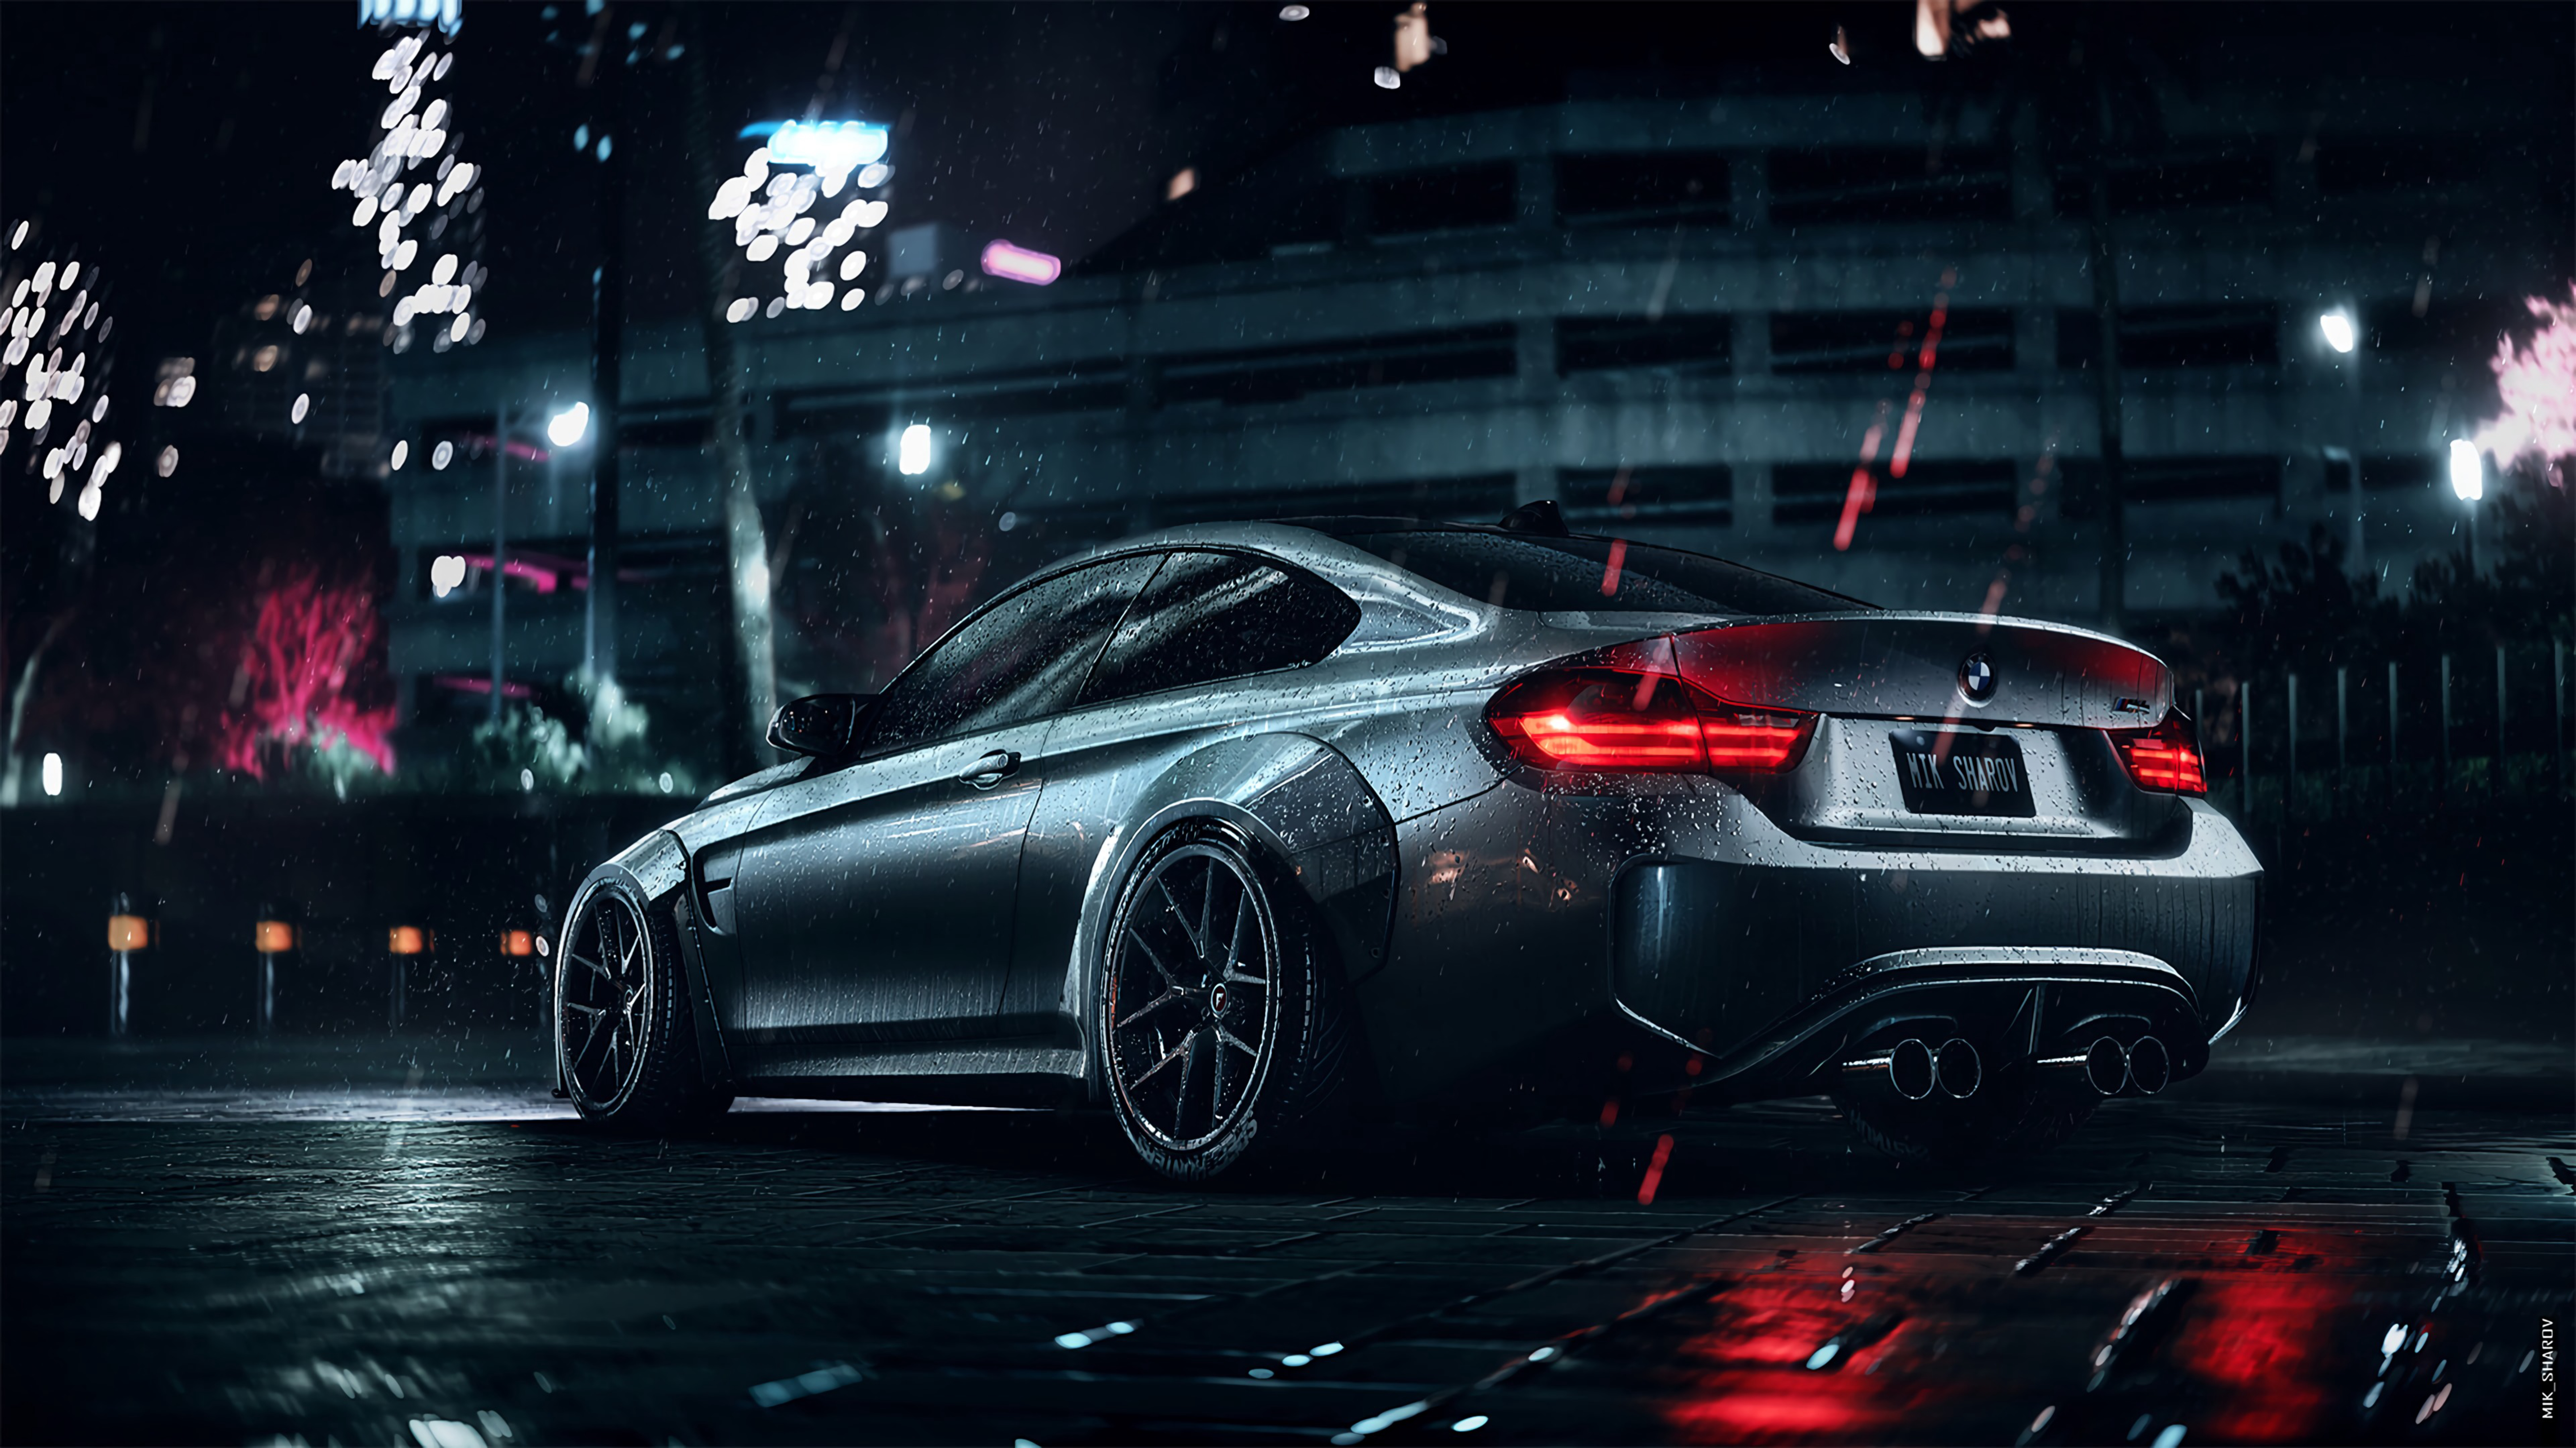 bmw, cars, metallic, car, night, grey, sports, wet, machine, coupe, compartment for android